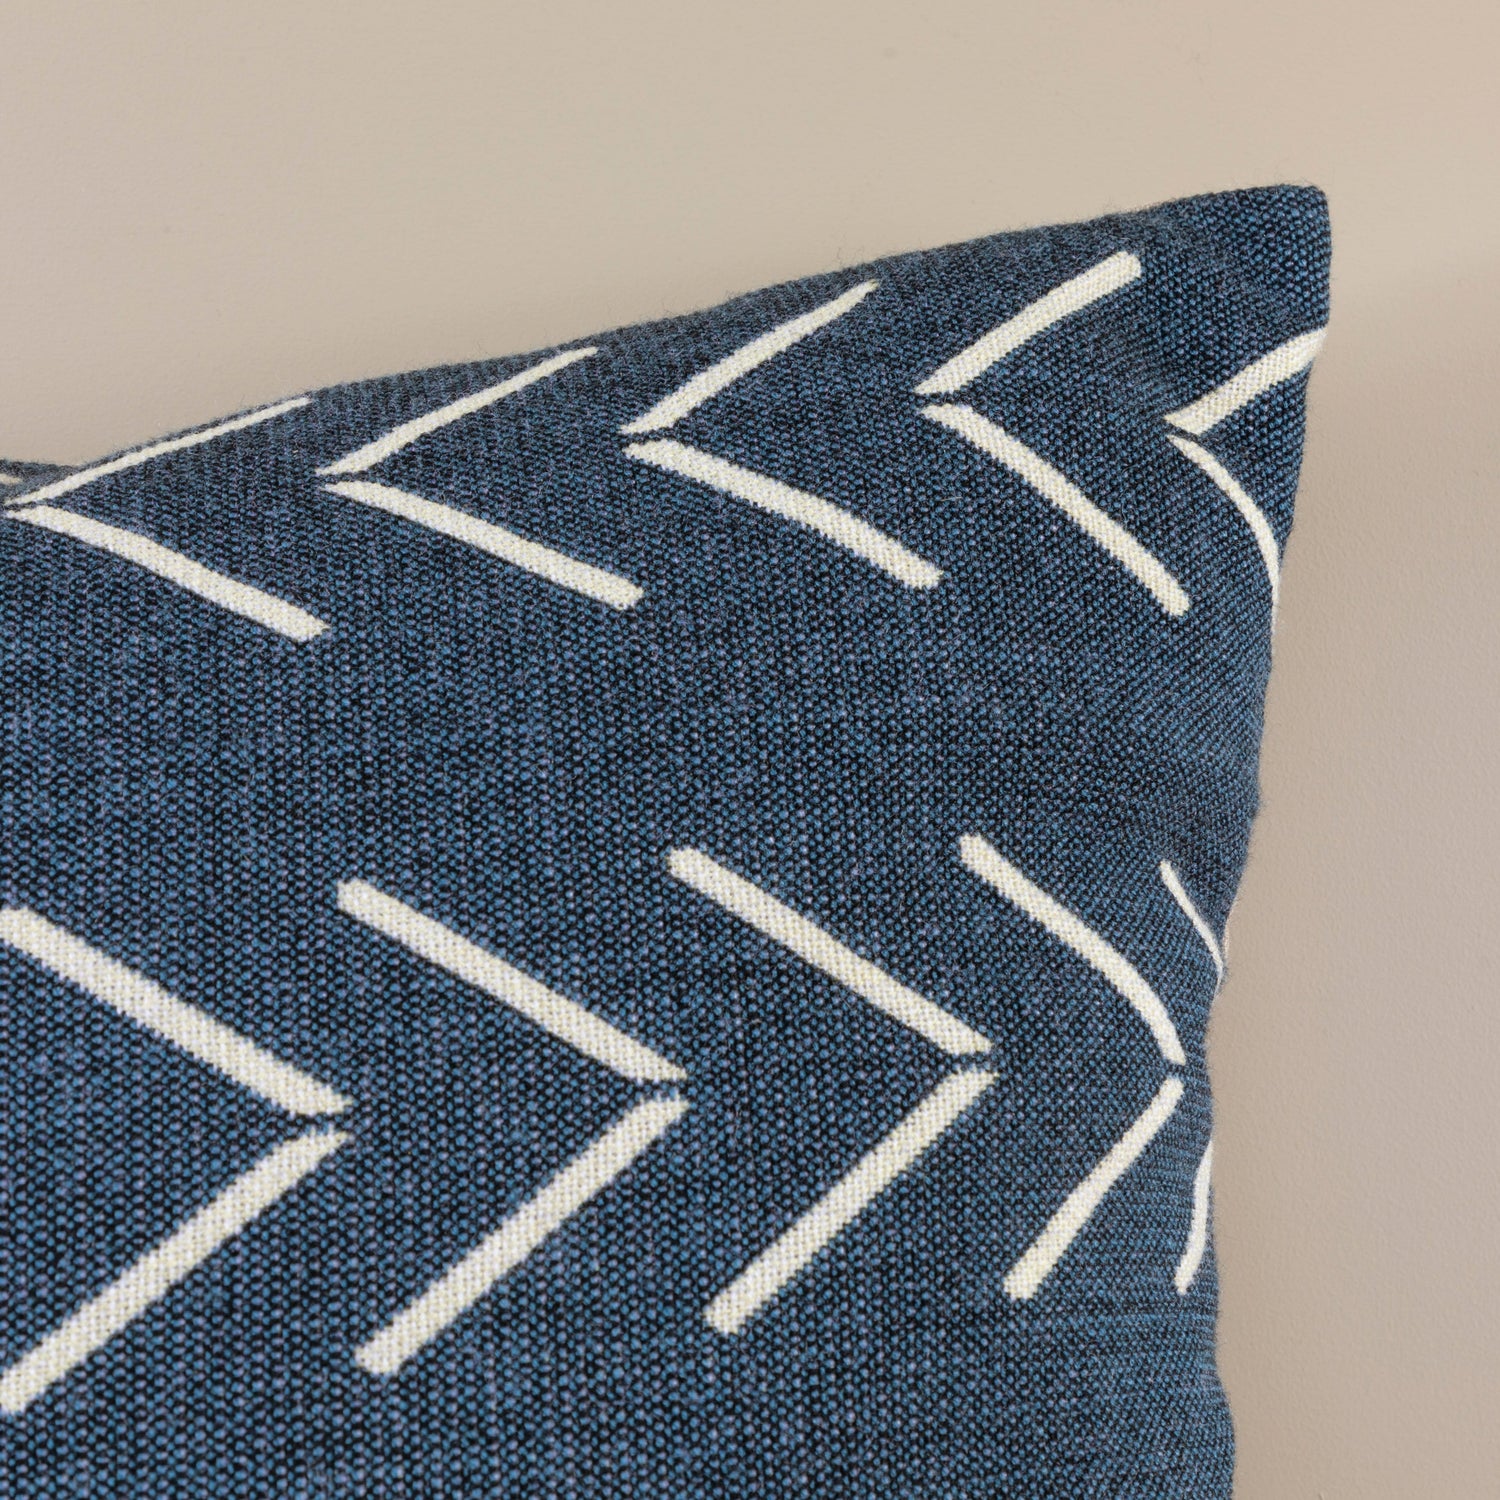 Alpaca Square Pillow, Navy with Chevrons